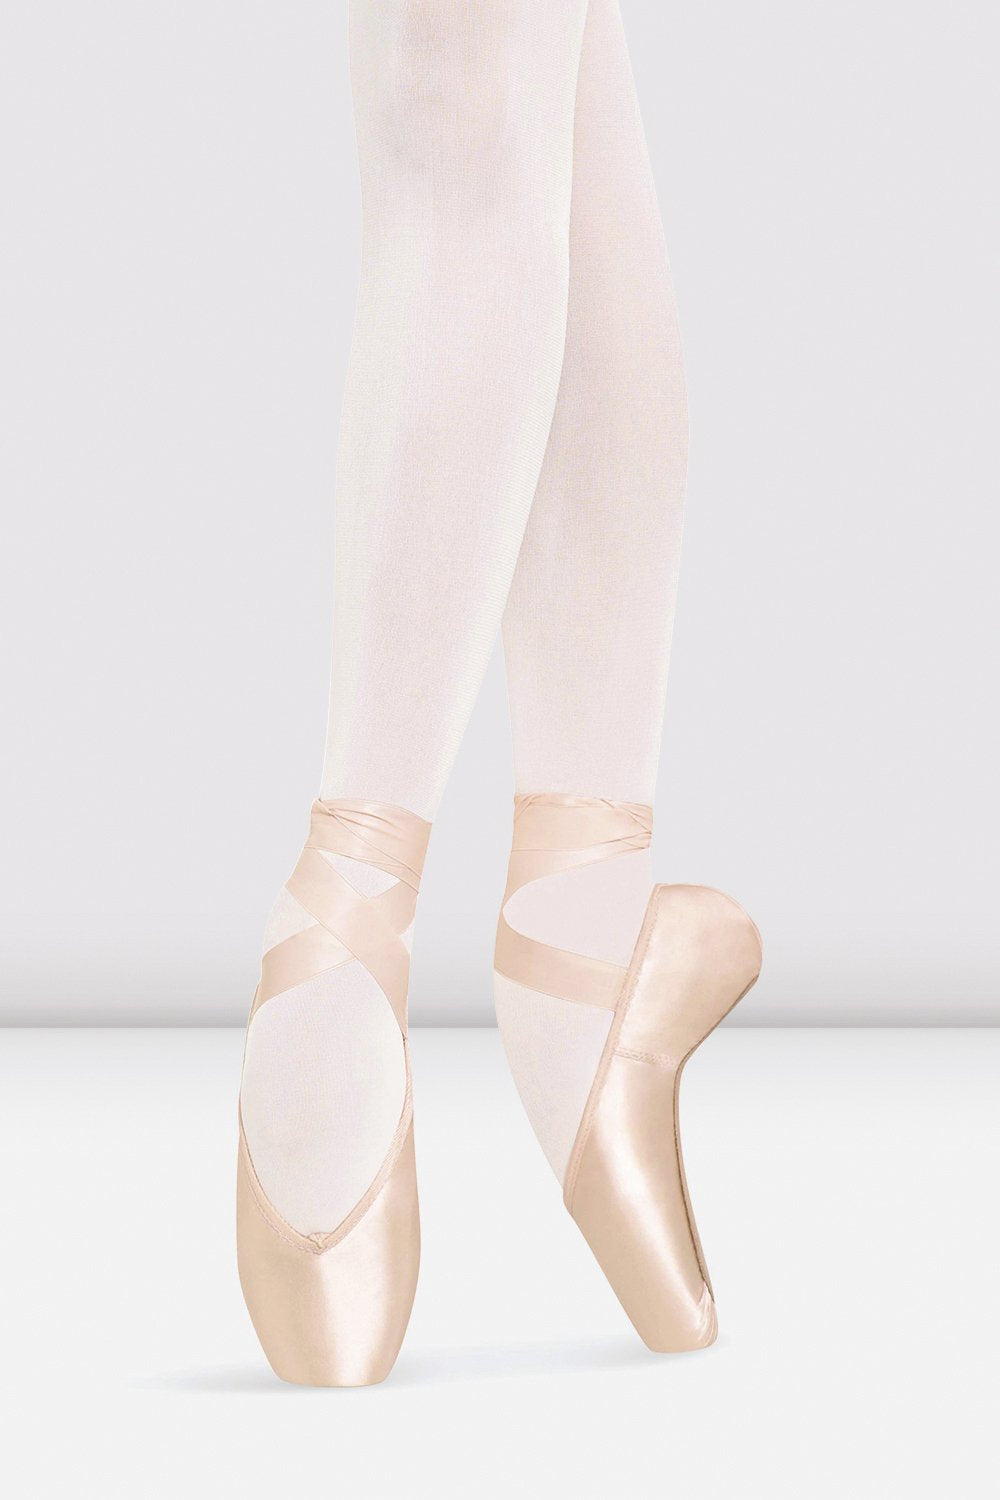 how much are ballet shoes 2